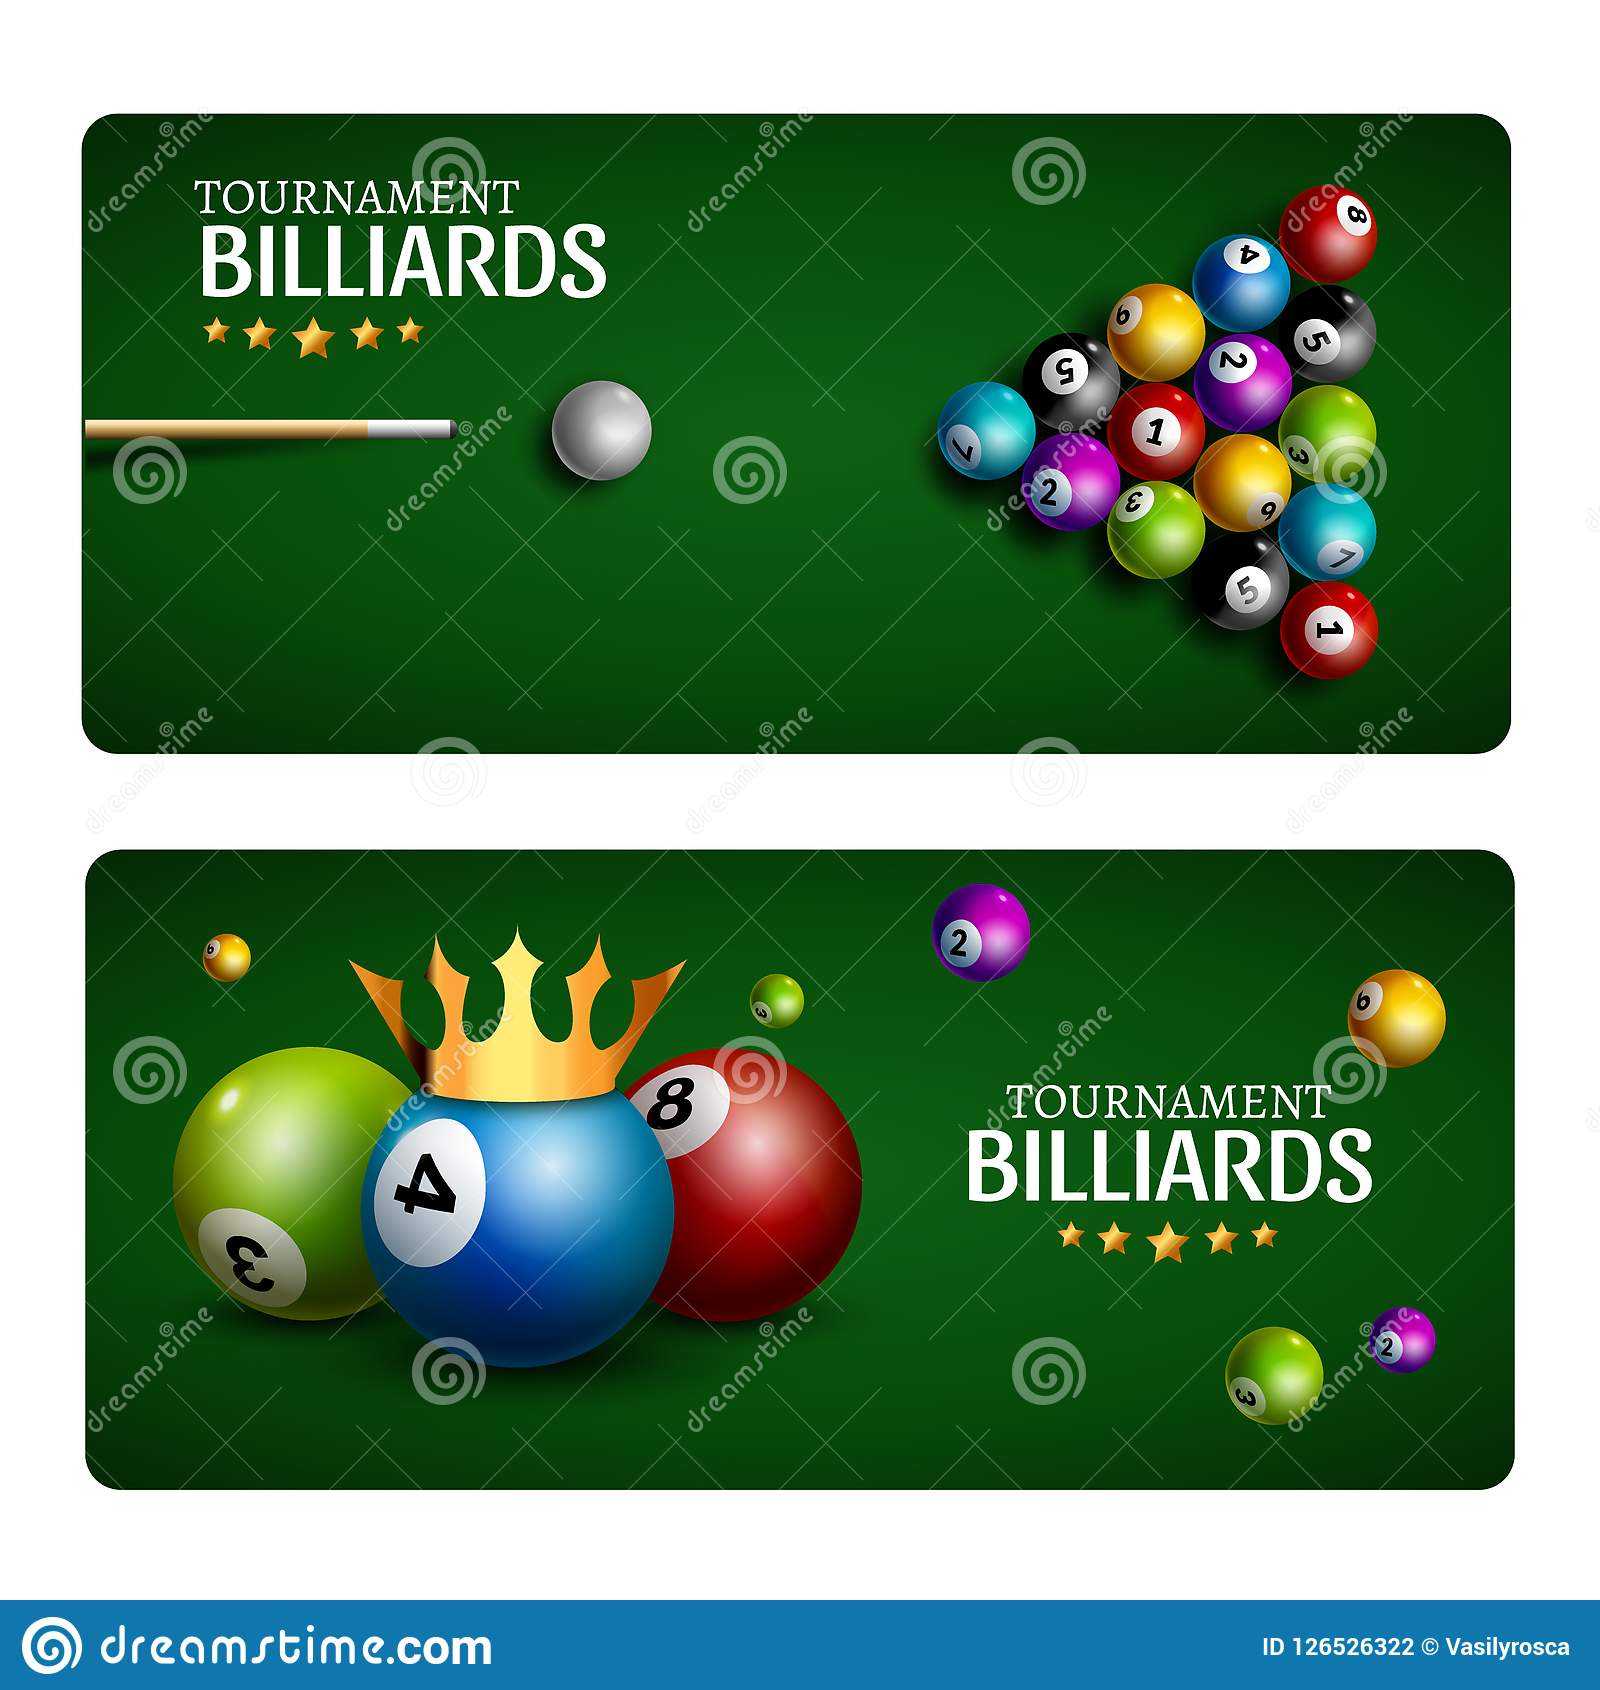 Billiard Club Game Banner Template. Billiard Pool Green Intended For Sports Banner Templates